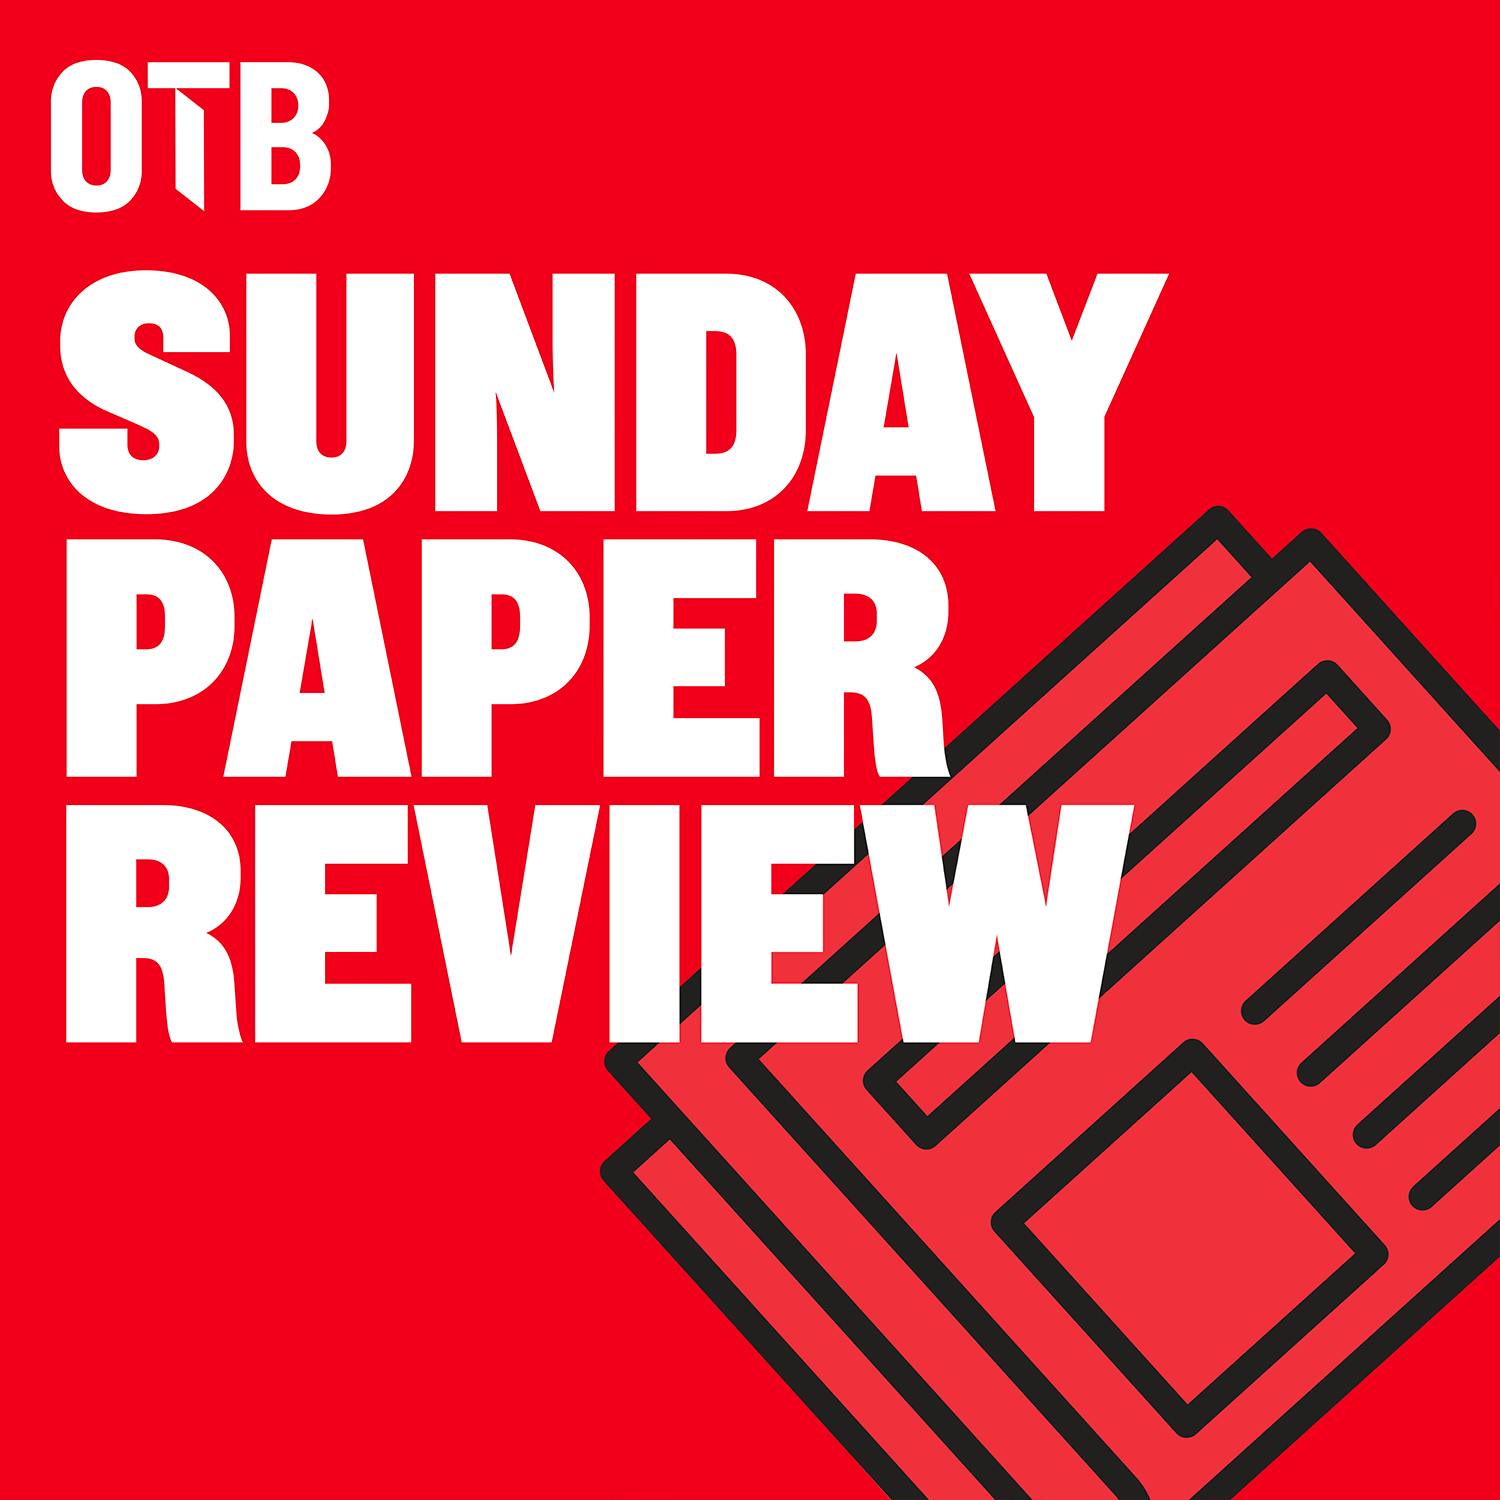 THE SUNDAY PAPER REVIEW | Roy Curtis & Niall O’Toole